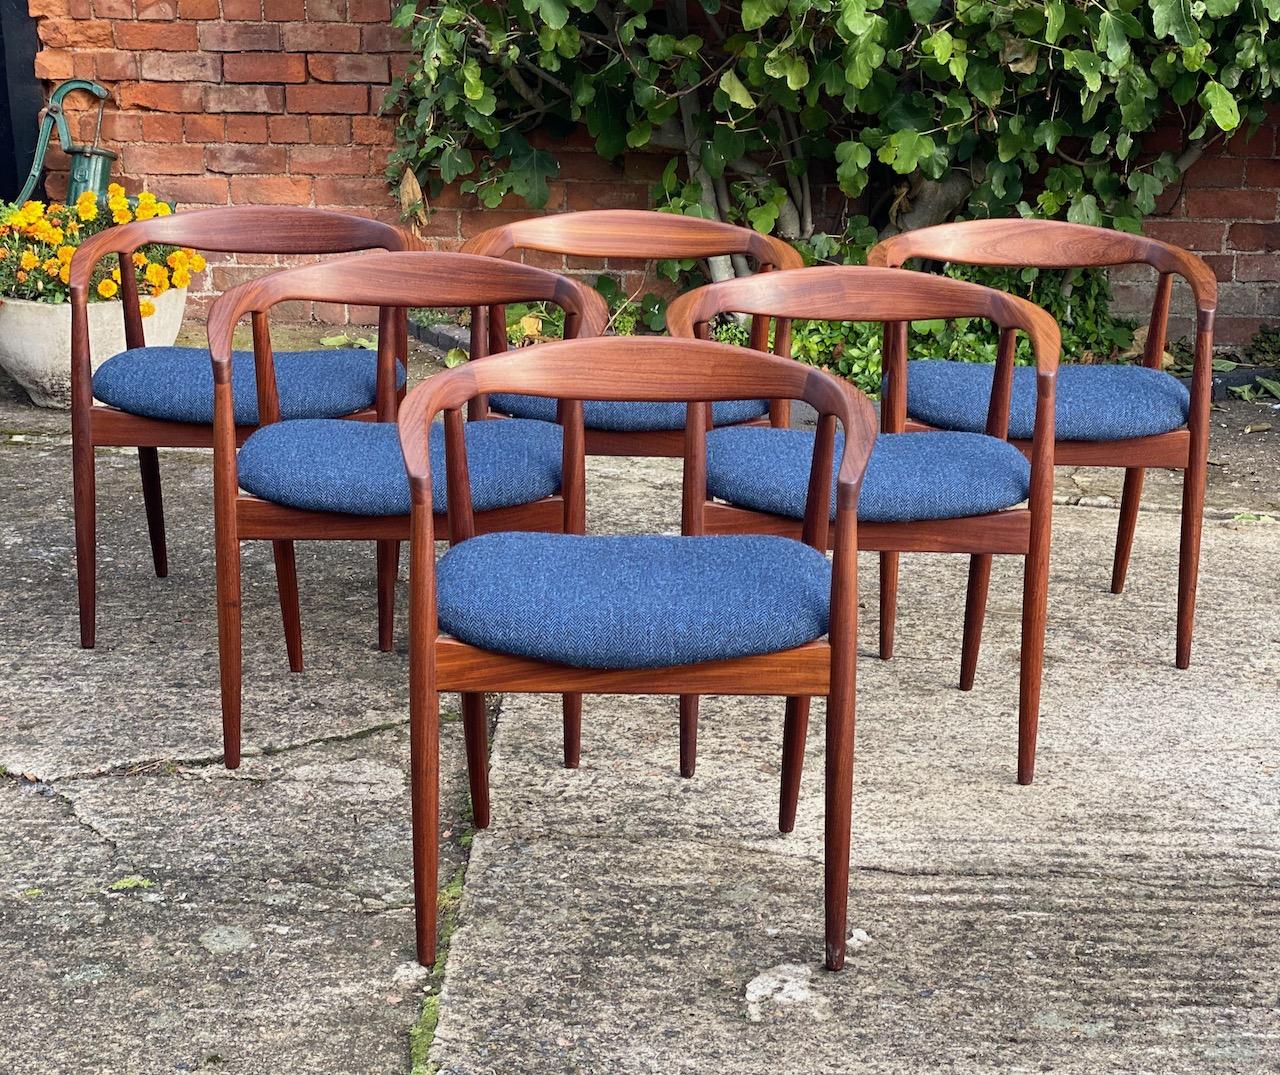 Kai Kristiansen Troja chairs set of six midcentury Danish, circa 1960

Midcentury Danish Kai Kristiansen Afromosia teak Troja chairs Denmark circa 1960, a super stylish and extremely comfortable dining chair, the quality and craftsmanship is